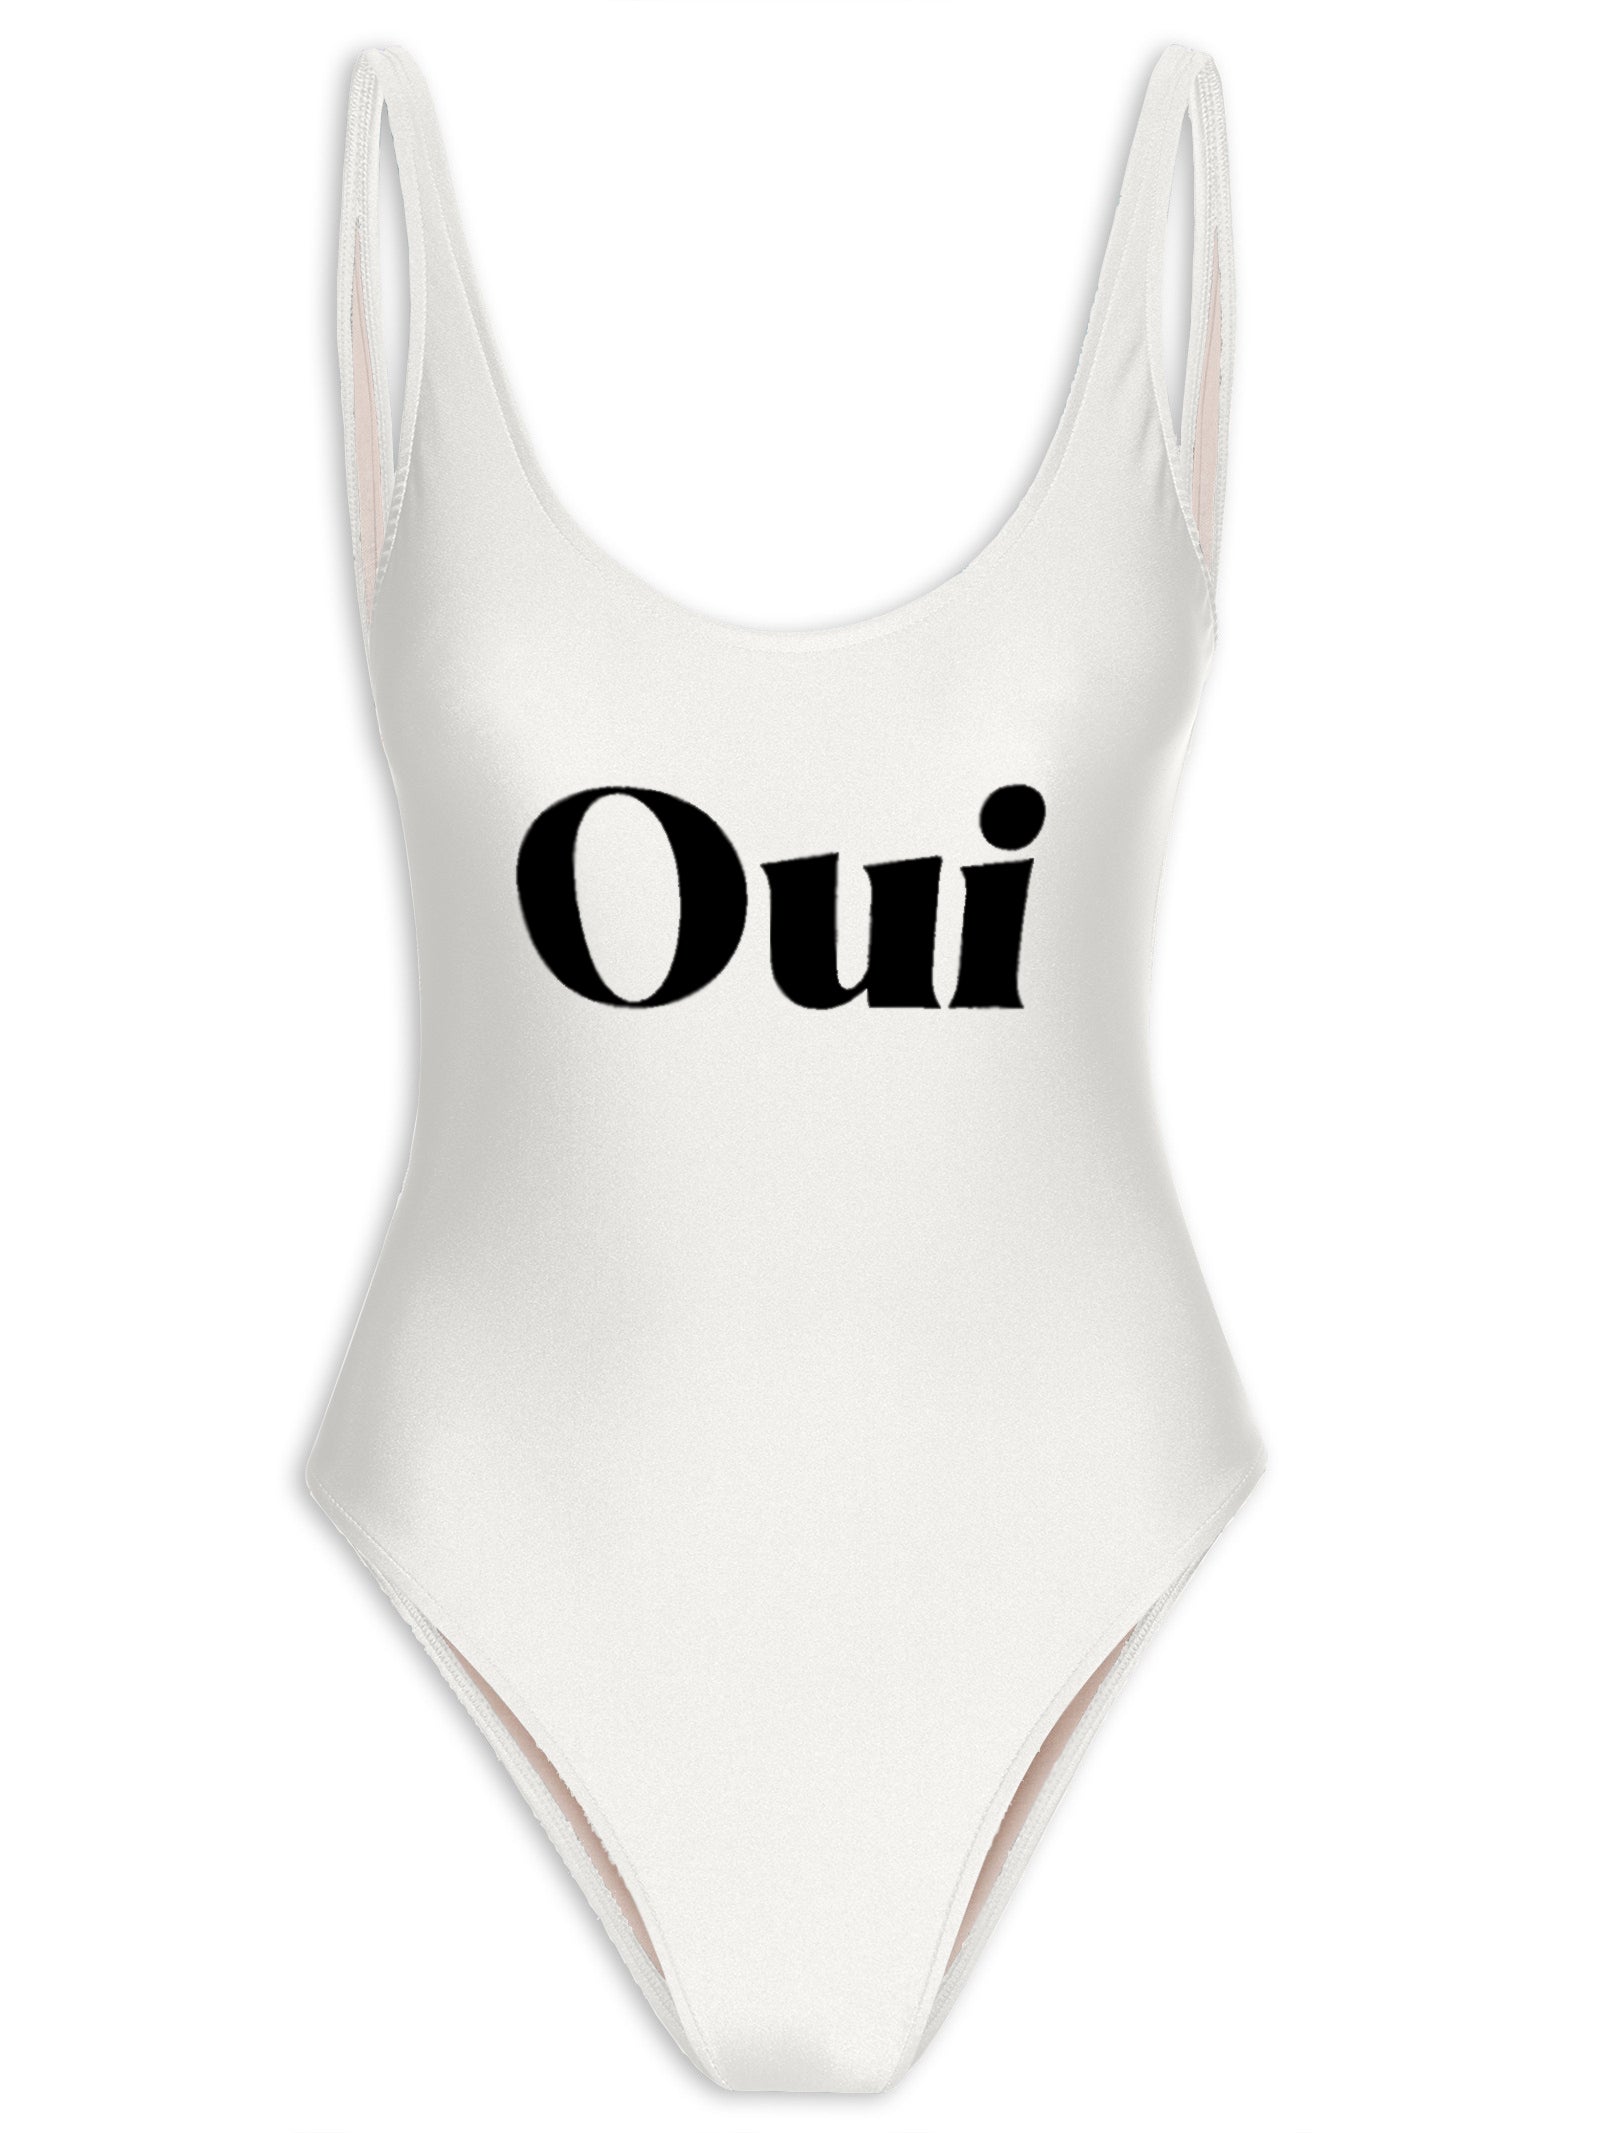 Off-White with Black Text Oui Low-Cut Swimsuit Product